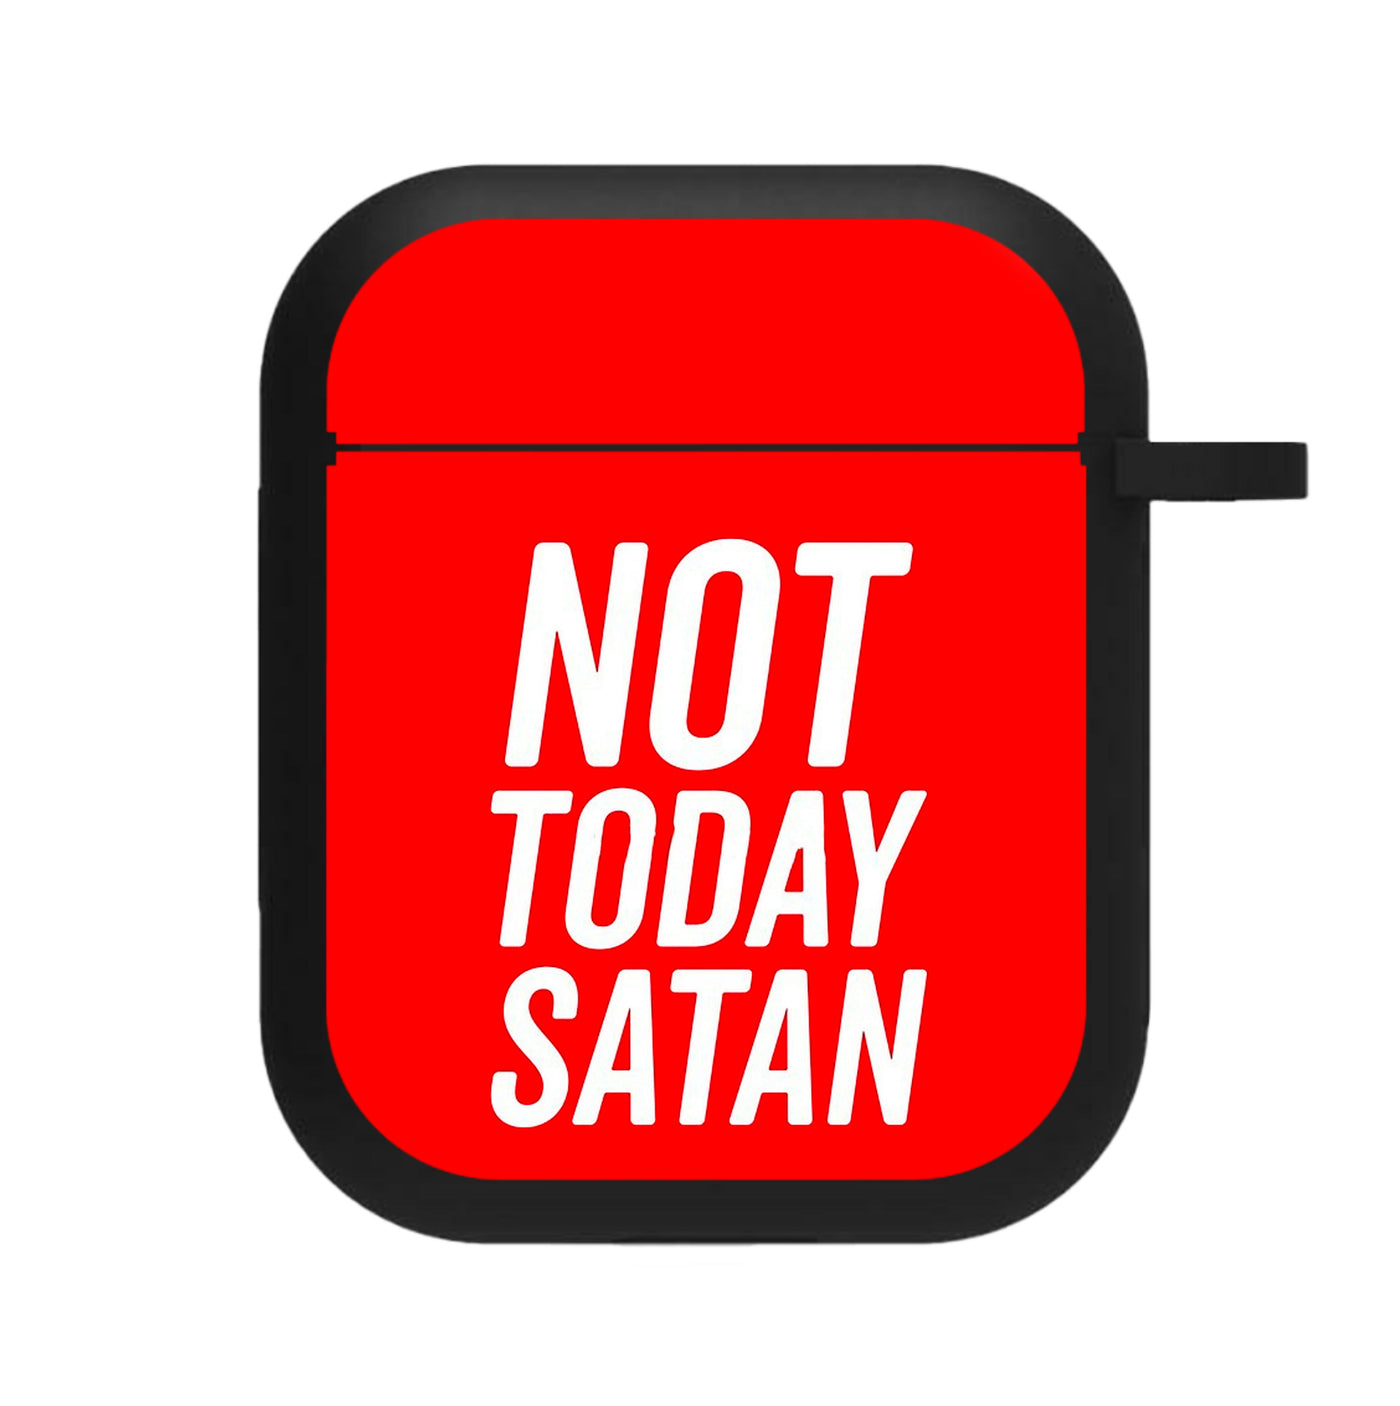 Red Not Today Satan - RuPaul's Drag Race AirPods Case